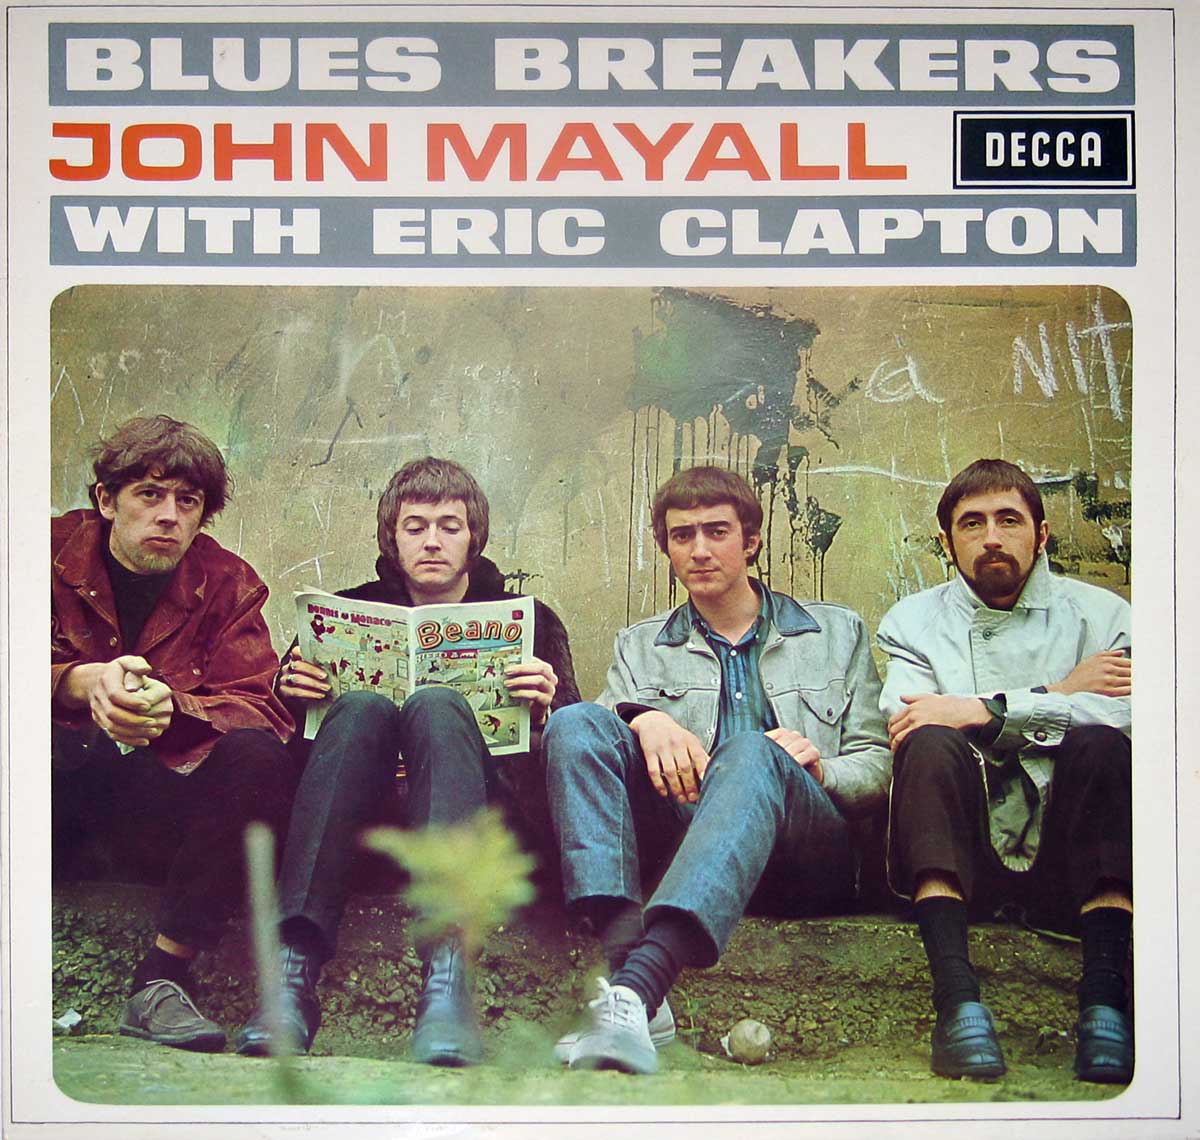 Album Front Cover Photo of John Mayall Blues Breakers With Eric Clapton 